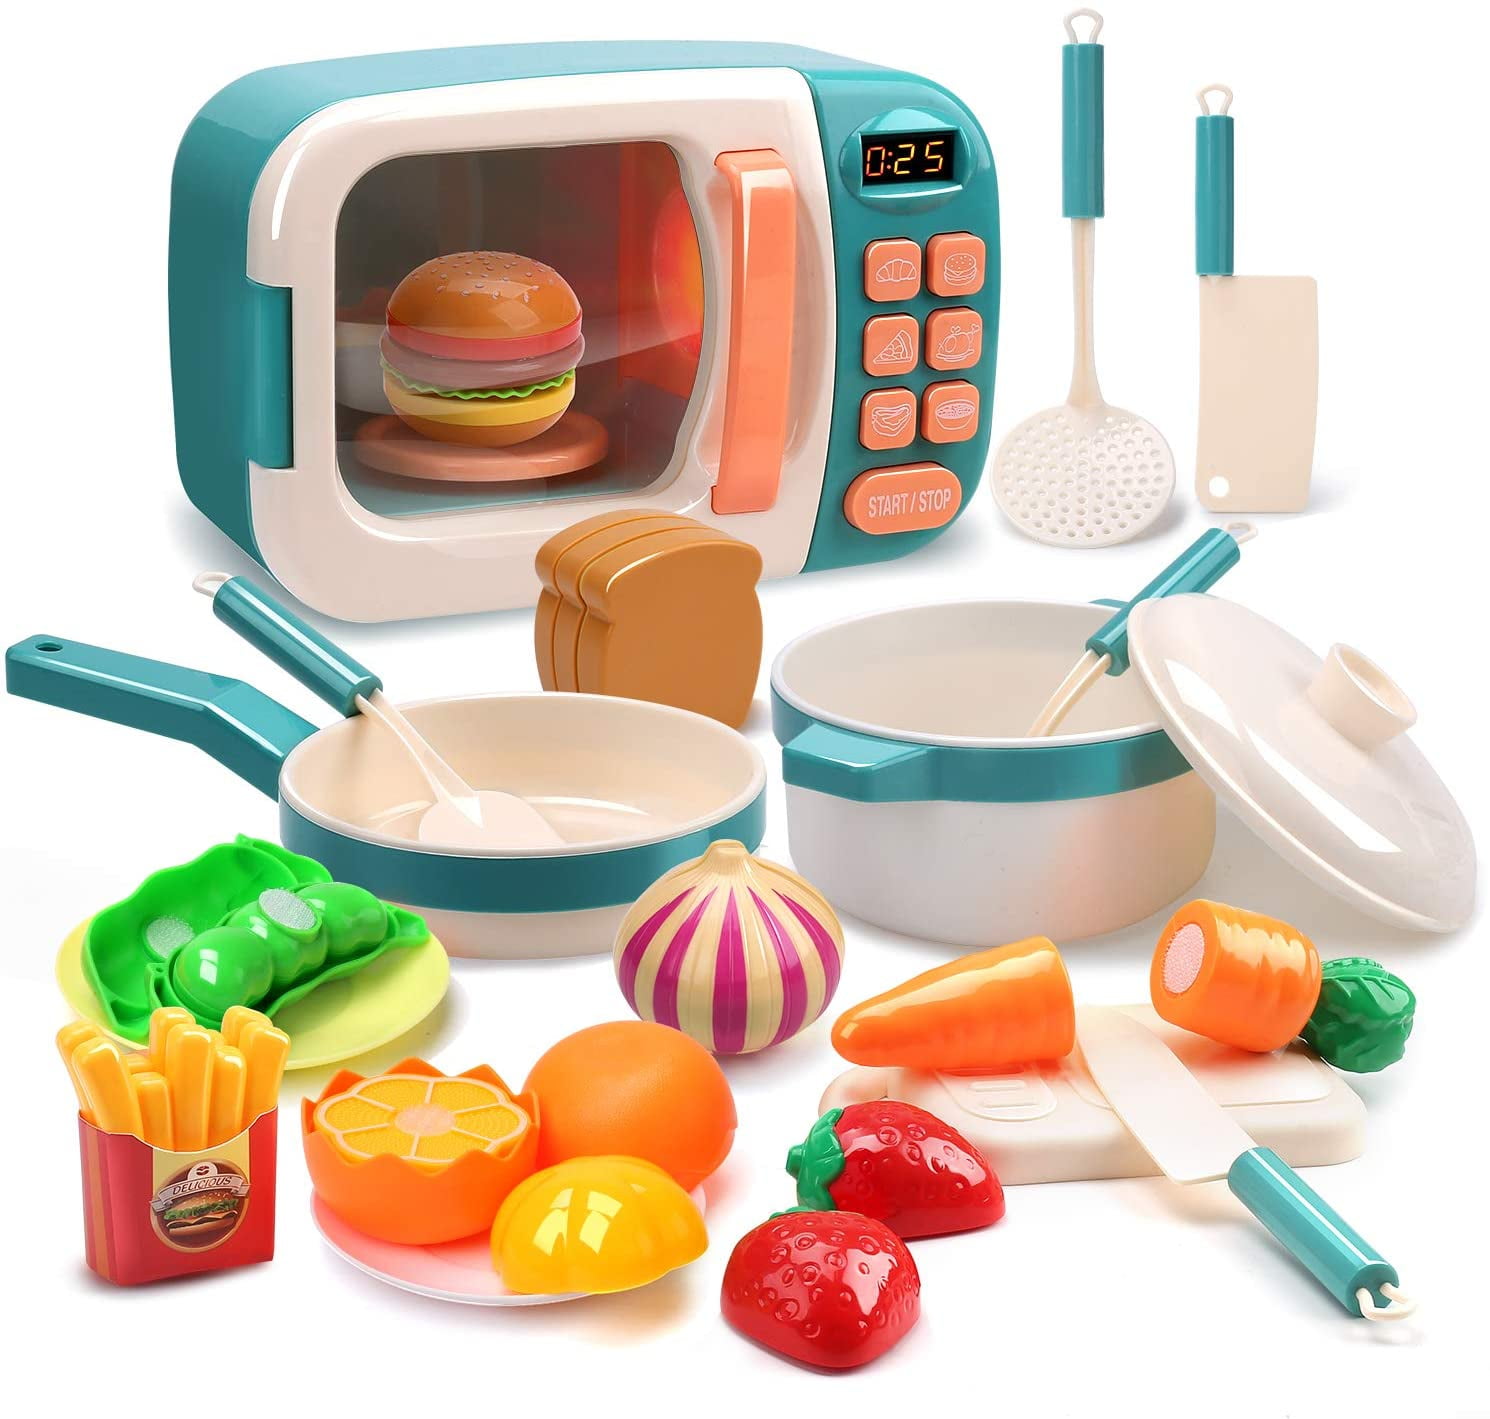 Toys Kitchen Play Set Kids Pretend Play Electronic Oven with Play Food Cookware Pot and Pan Toy